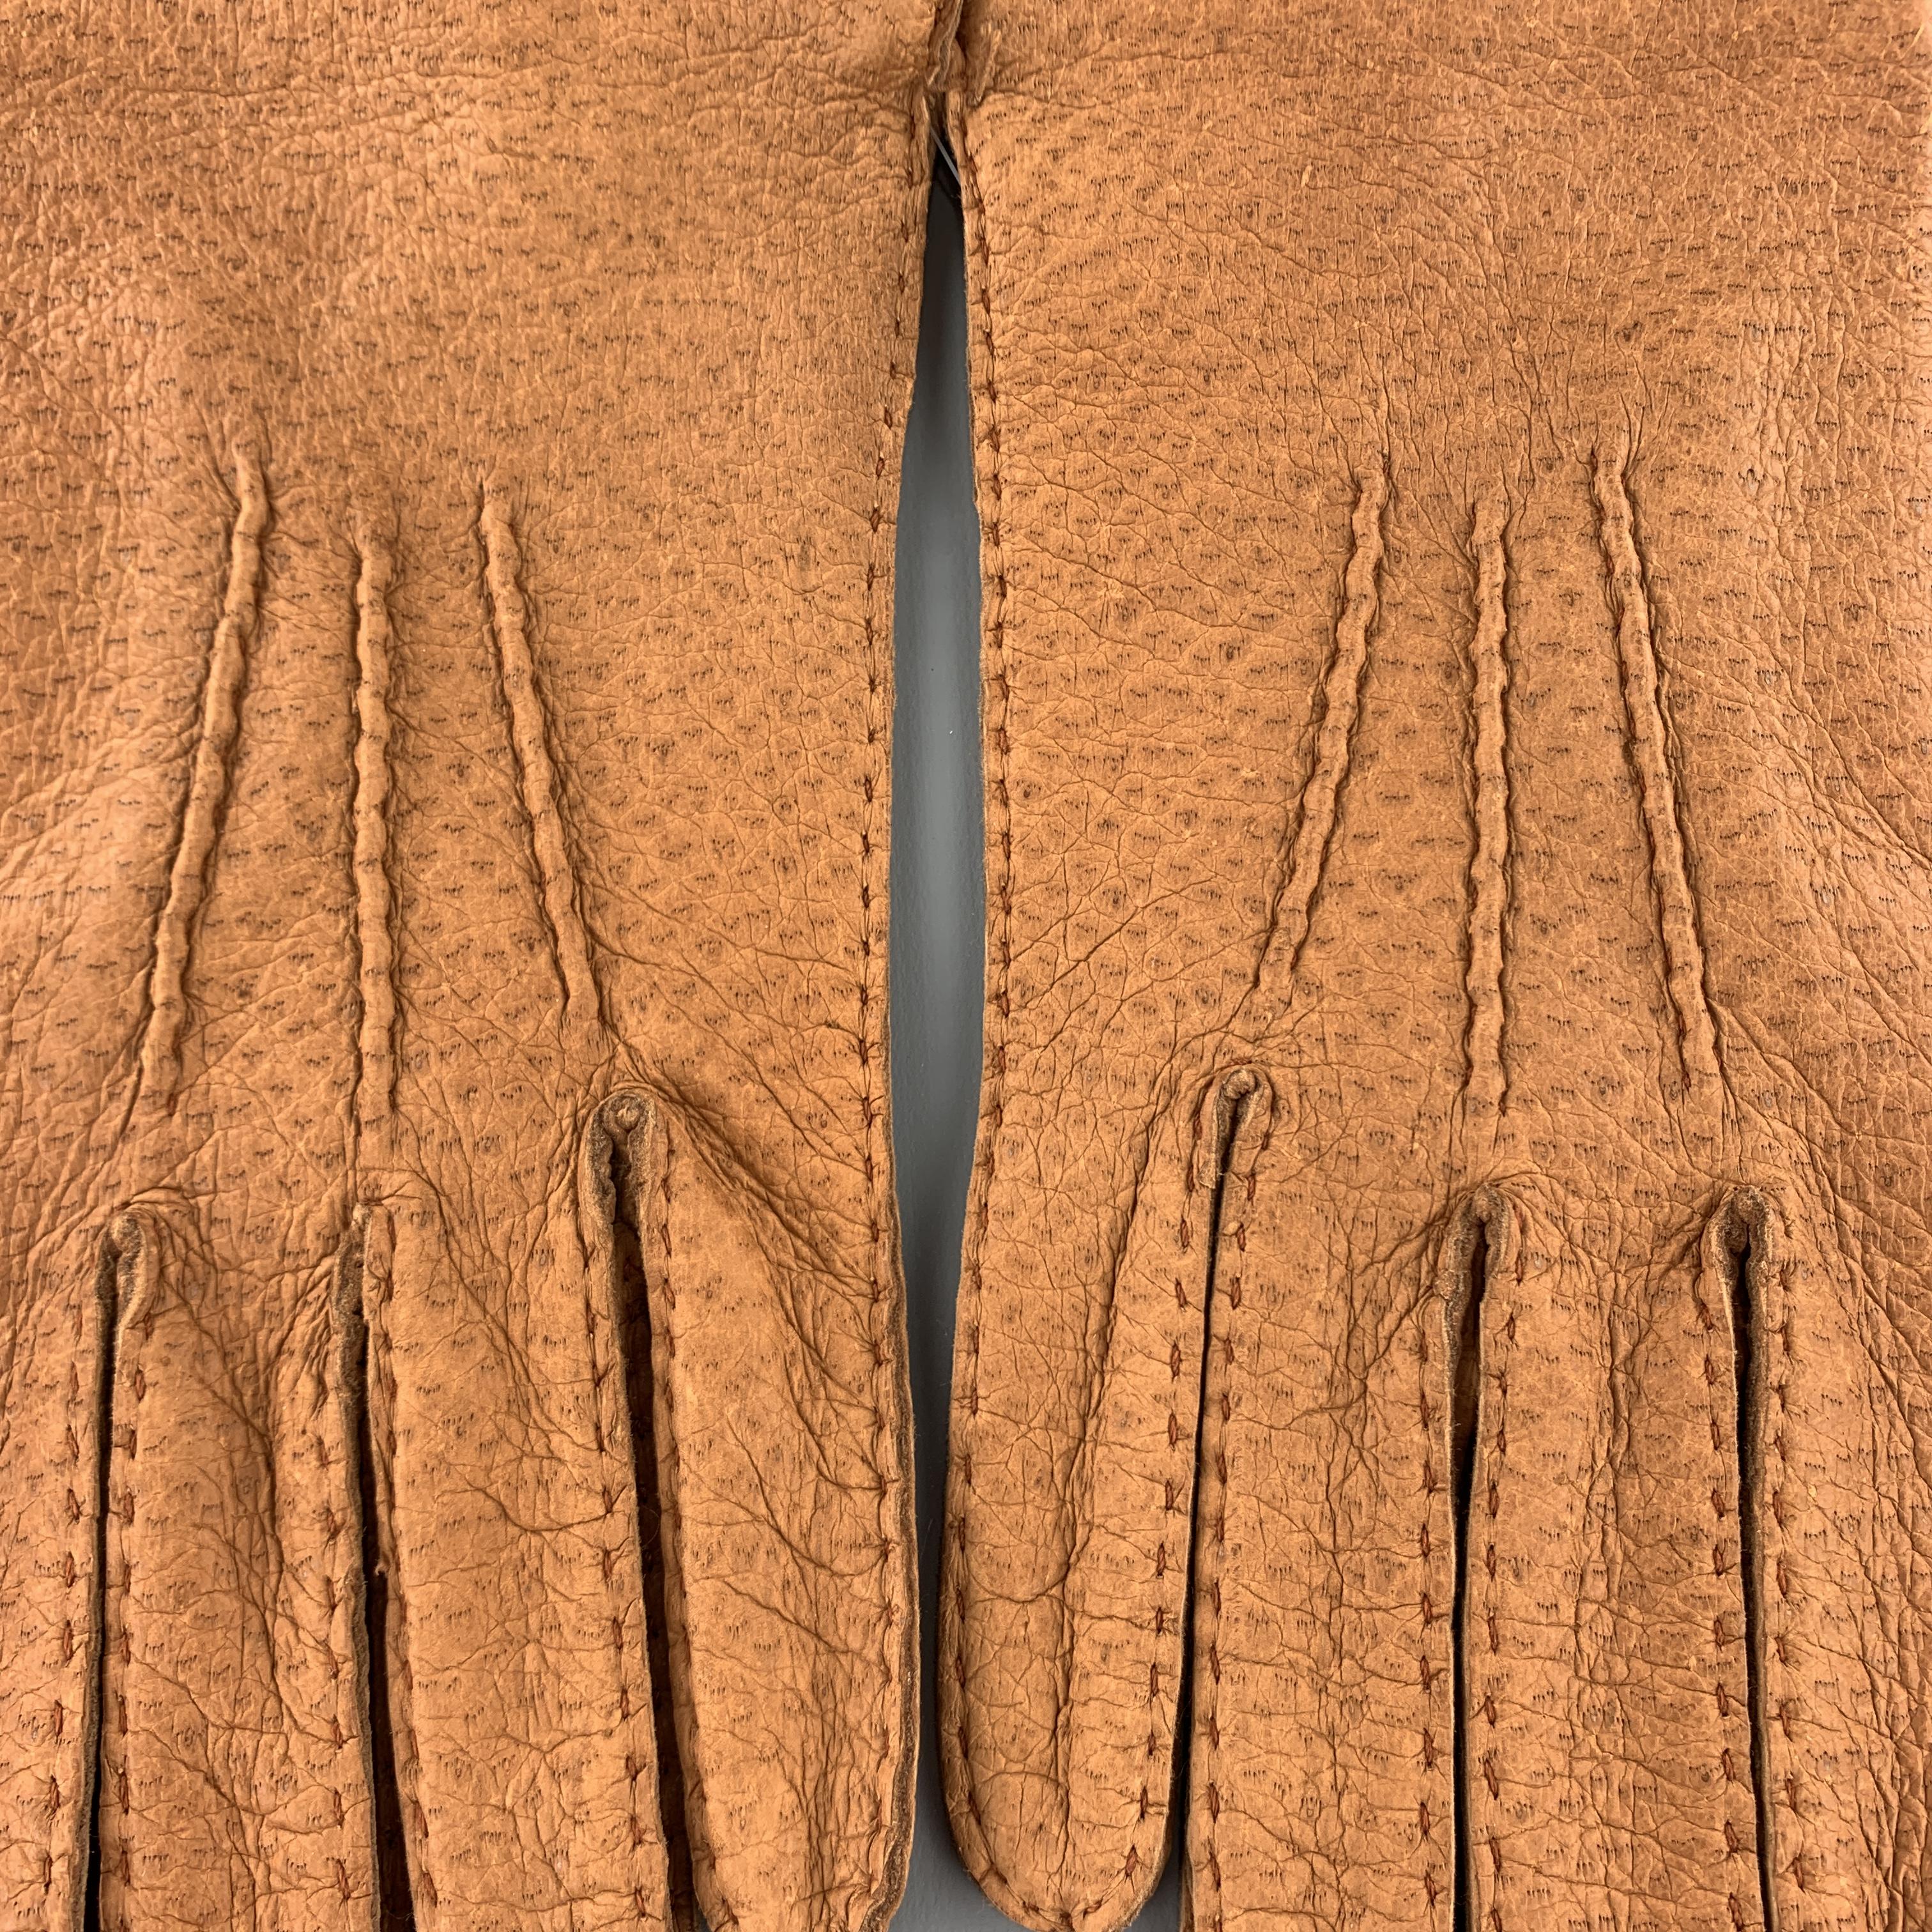 Vintage deadstock gloves come in tan textured hogskin leather with top stitching. Made in England.

Deadstock Vintage New.
Marked: 9

Width: 4 in.
Length: 9.5 in.